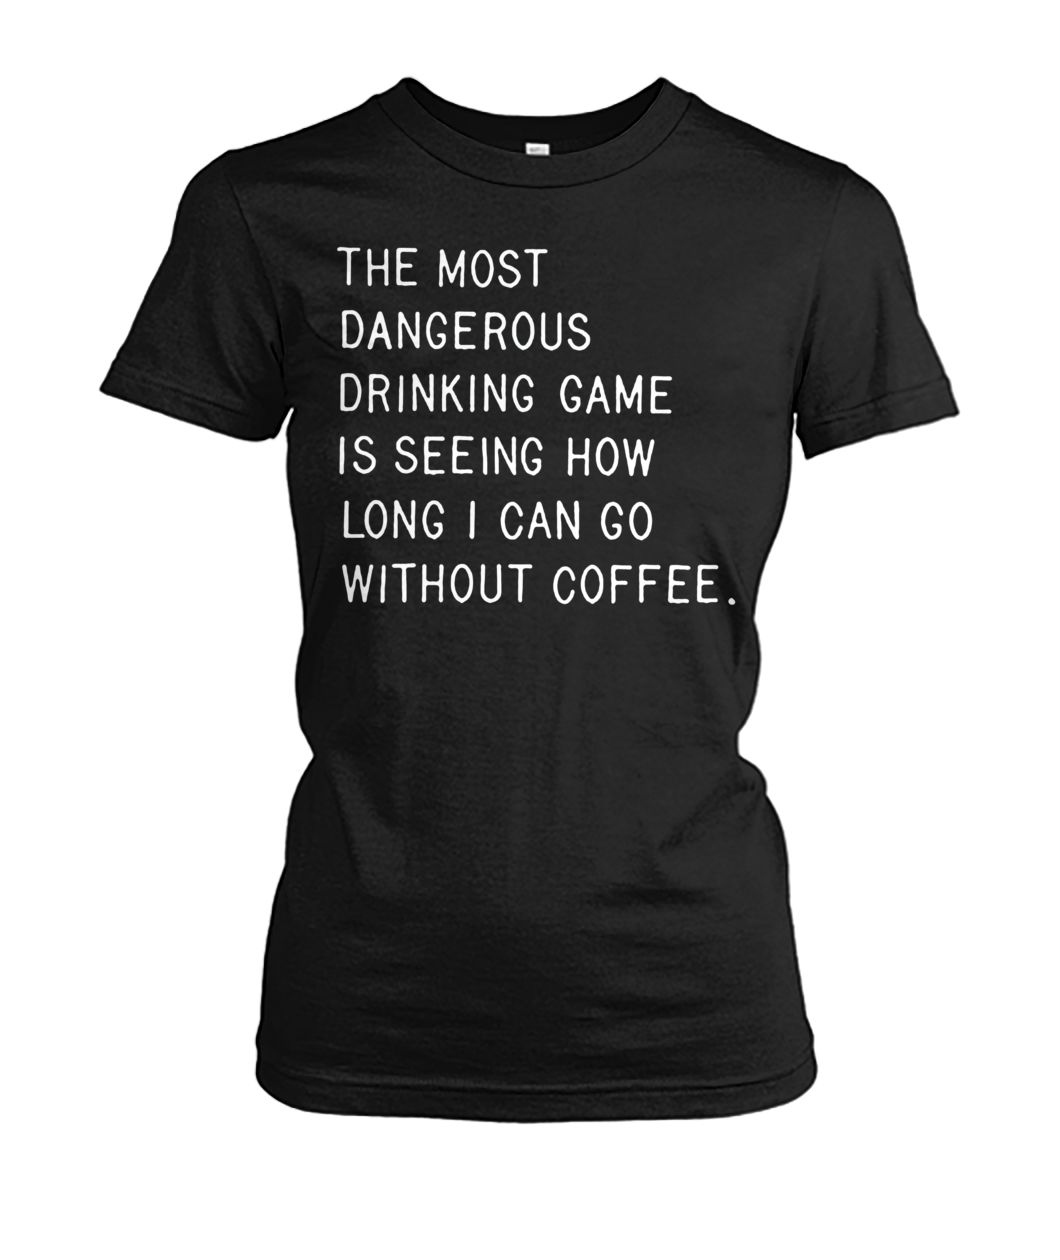 The most dangerous drinking game is seeing how long I can go without coffee women's crew tee